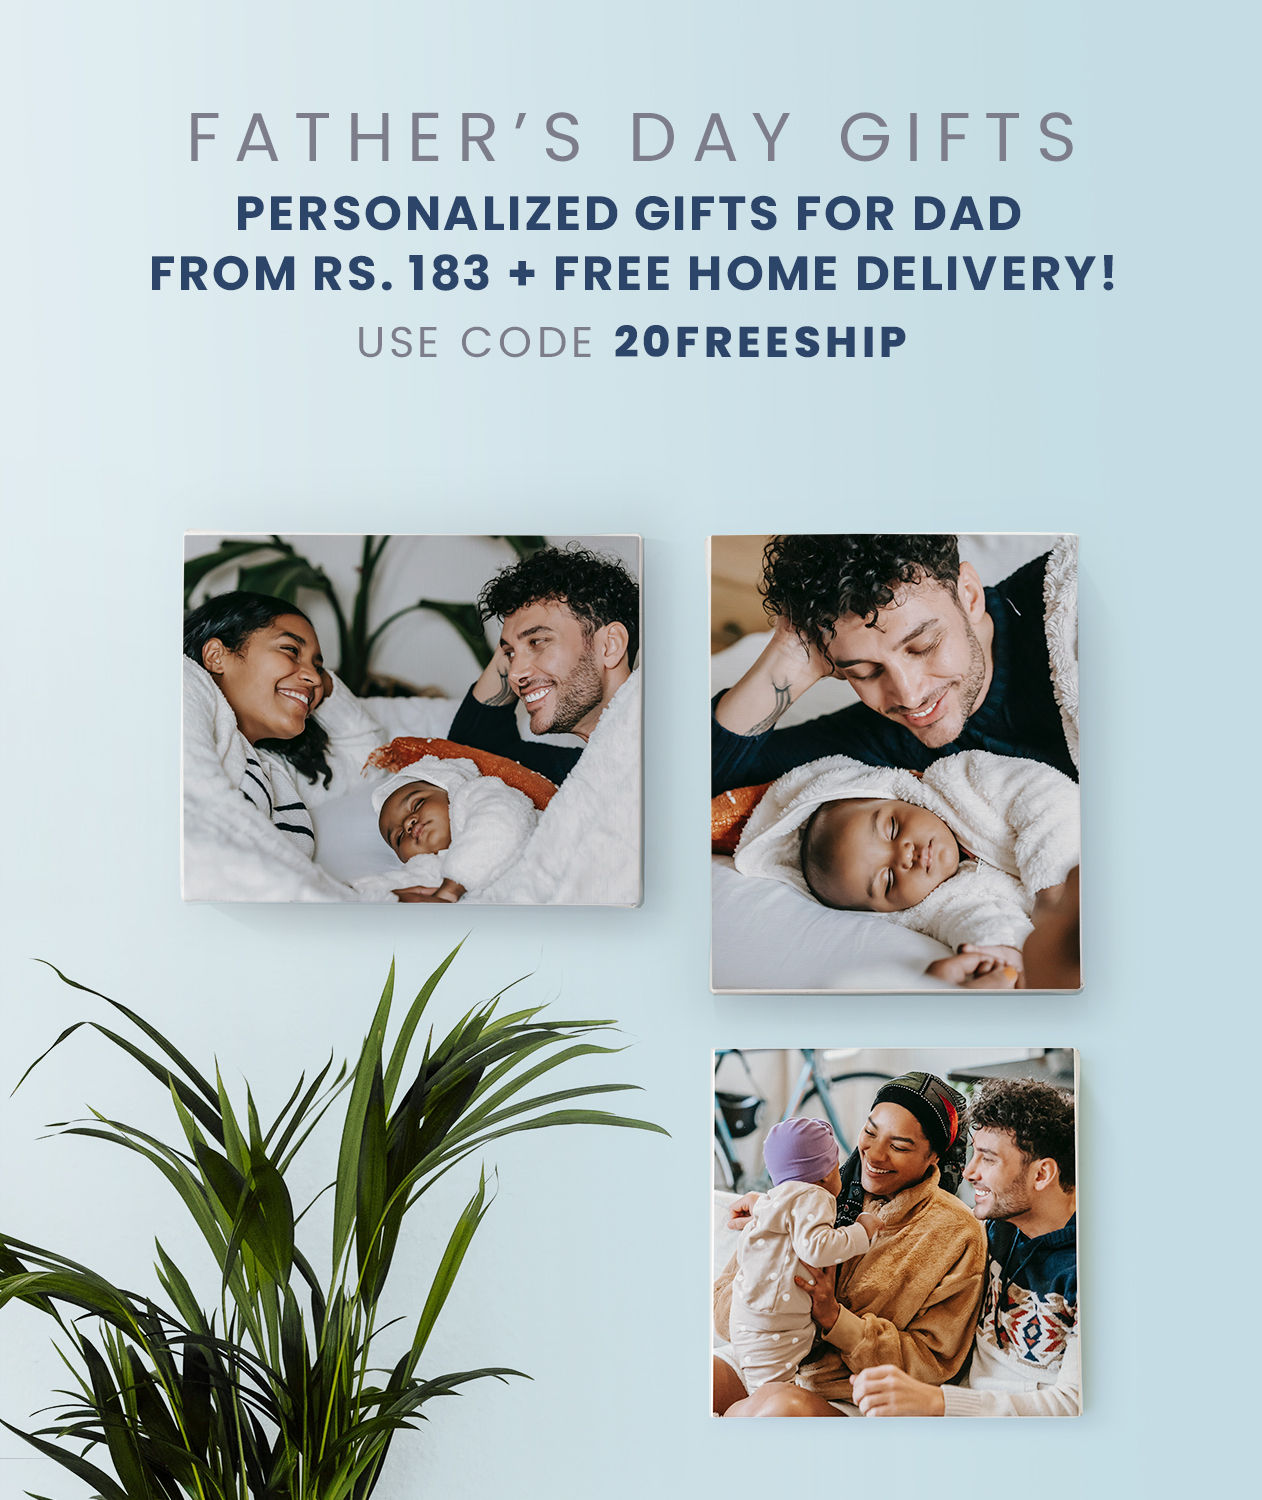 Father's Day Gifts Online | Unique Gift Ideas for Dad | Giftcart.com